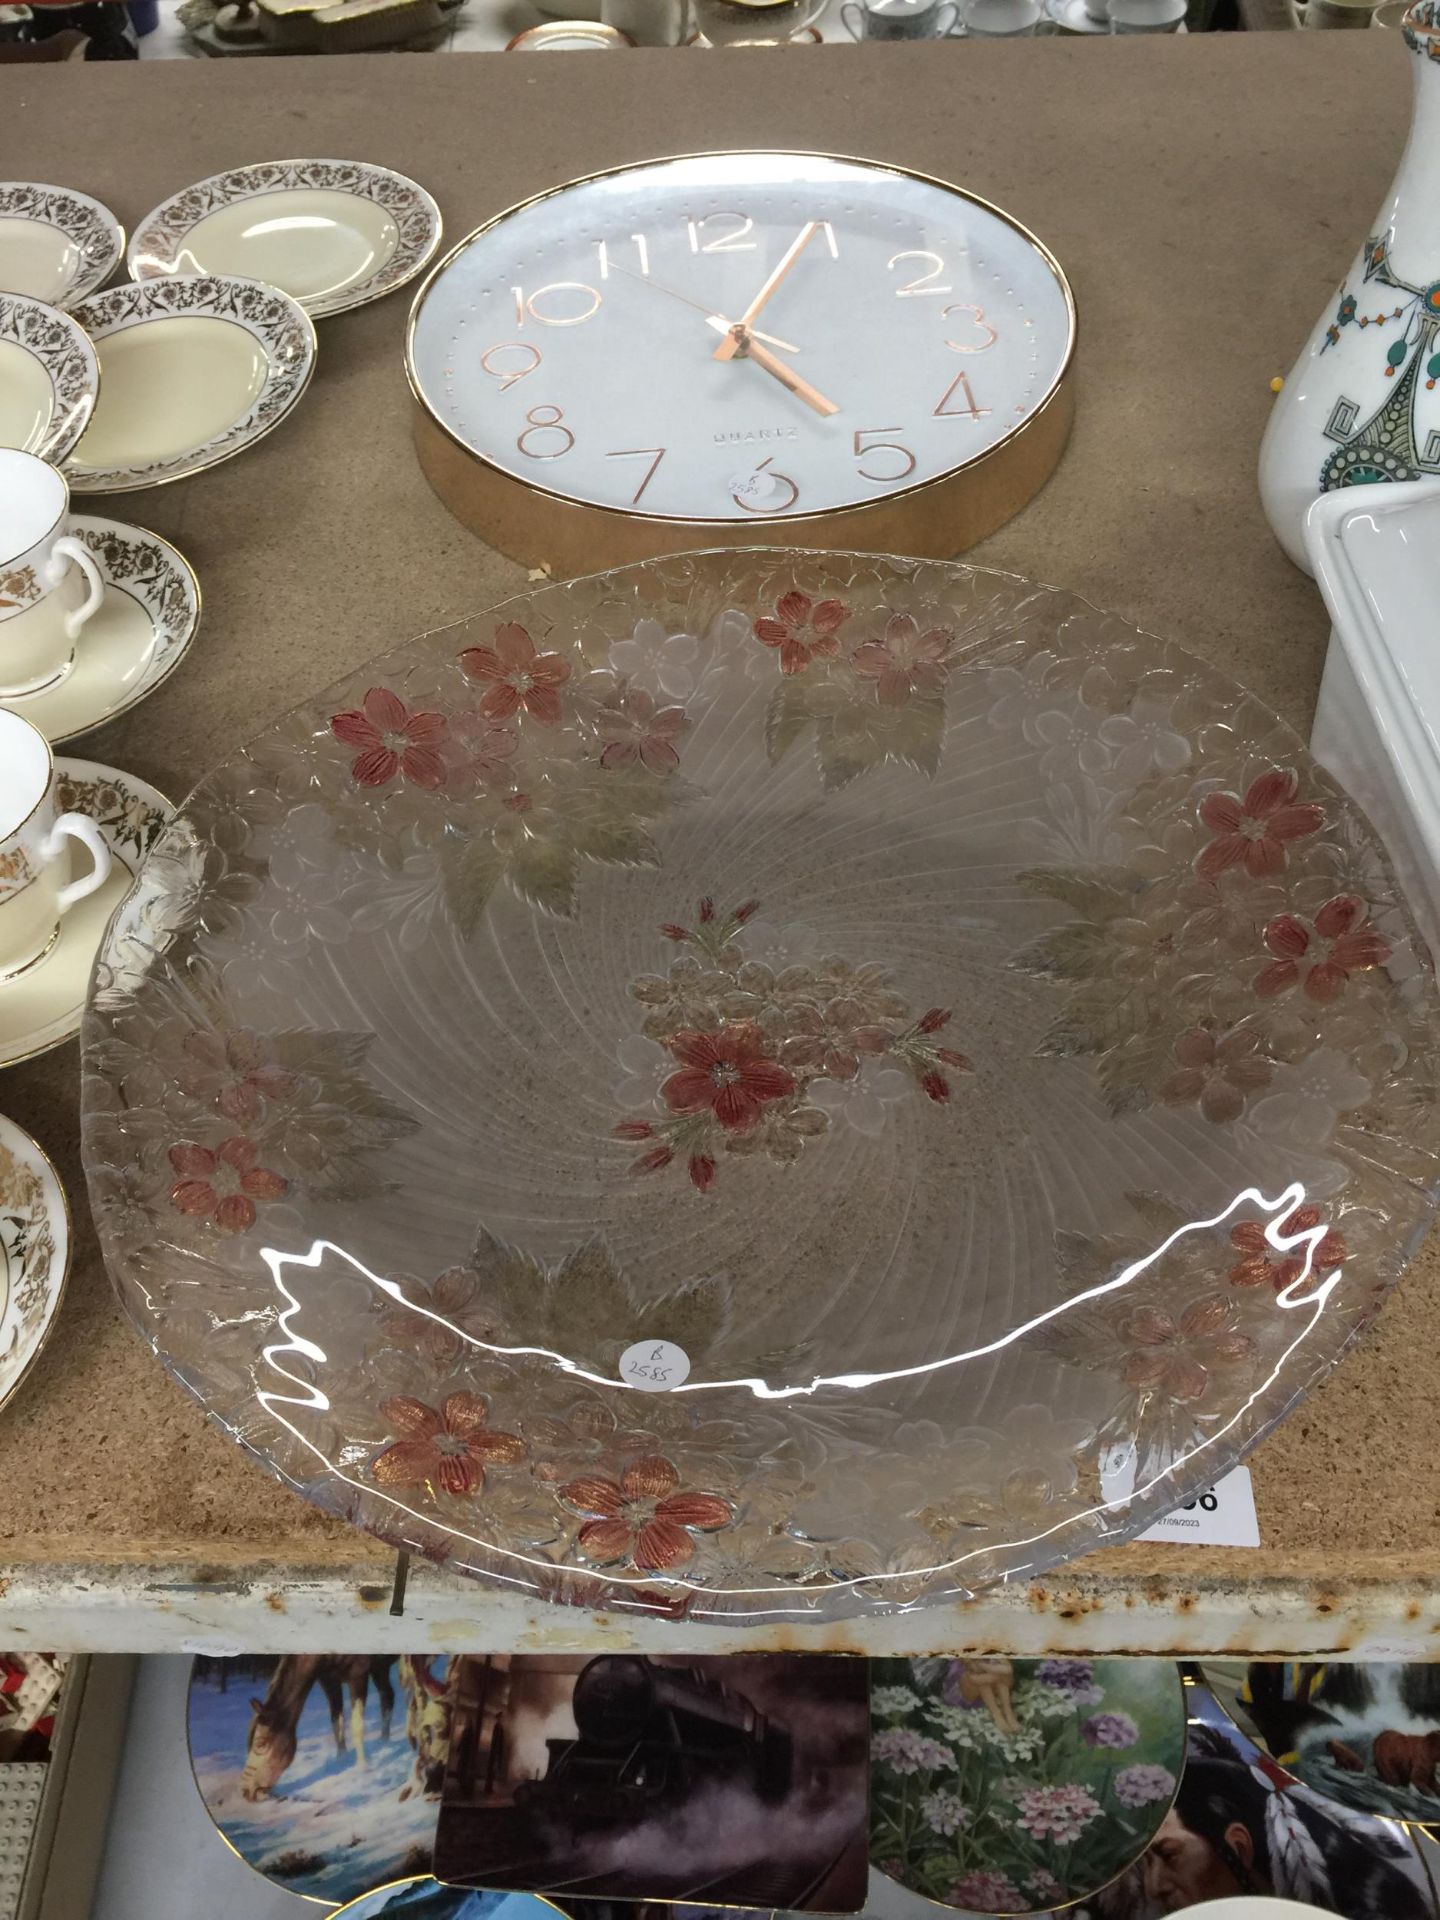 A LARGE FLORAL PATTERNED GLASS PLATE PLUS A WALL CLOCK